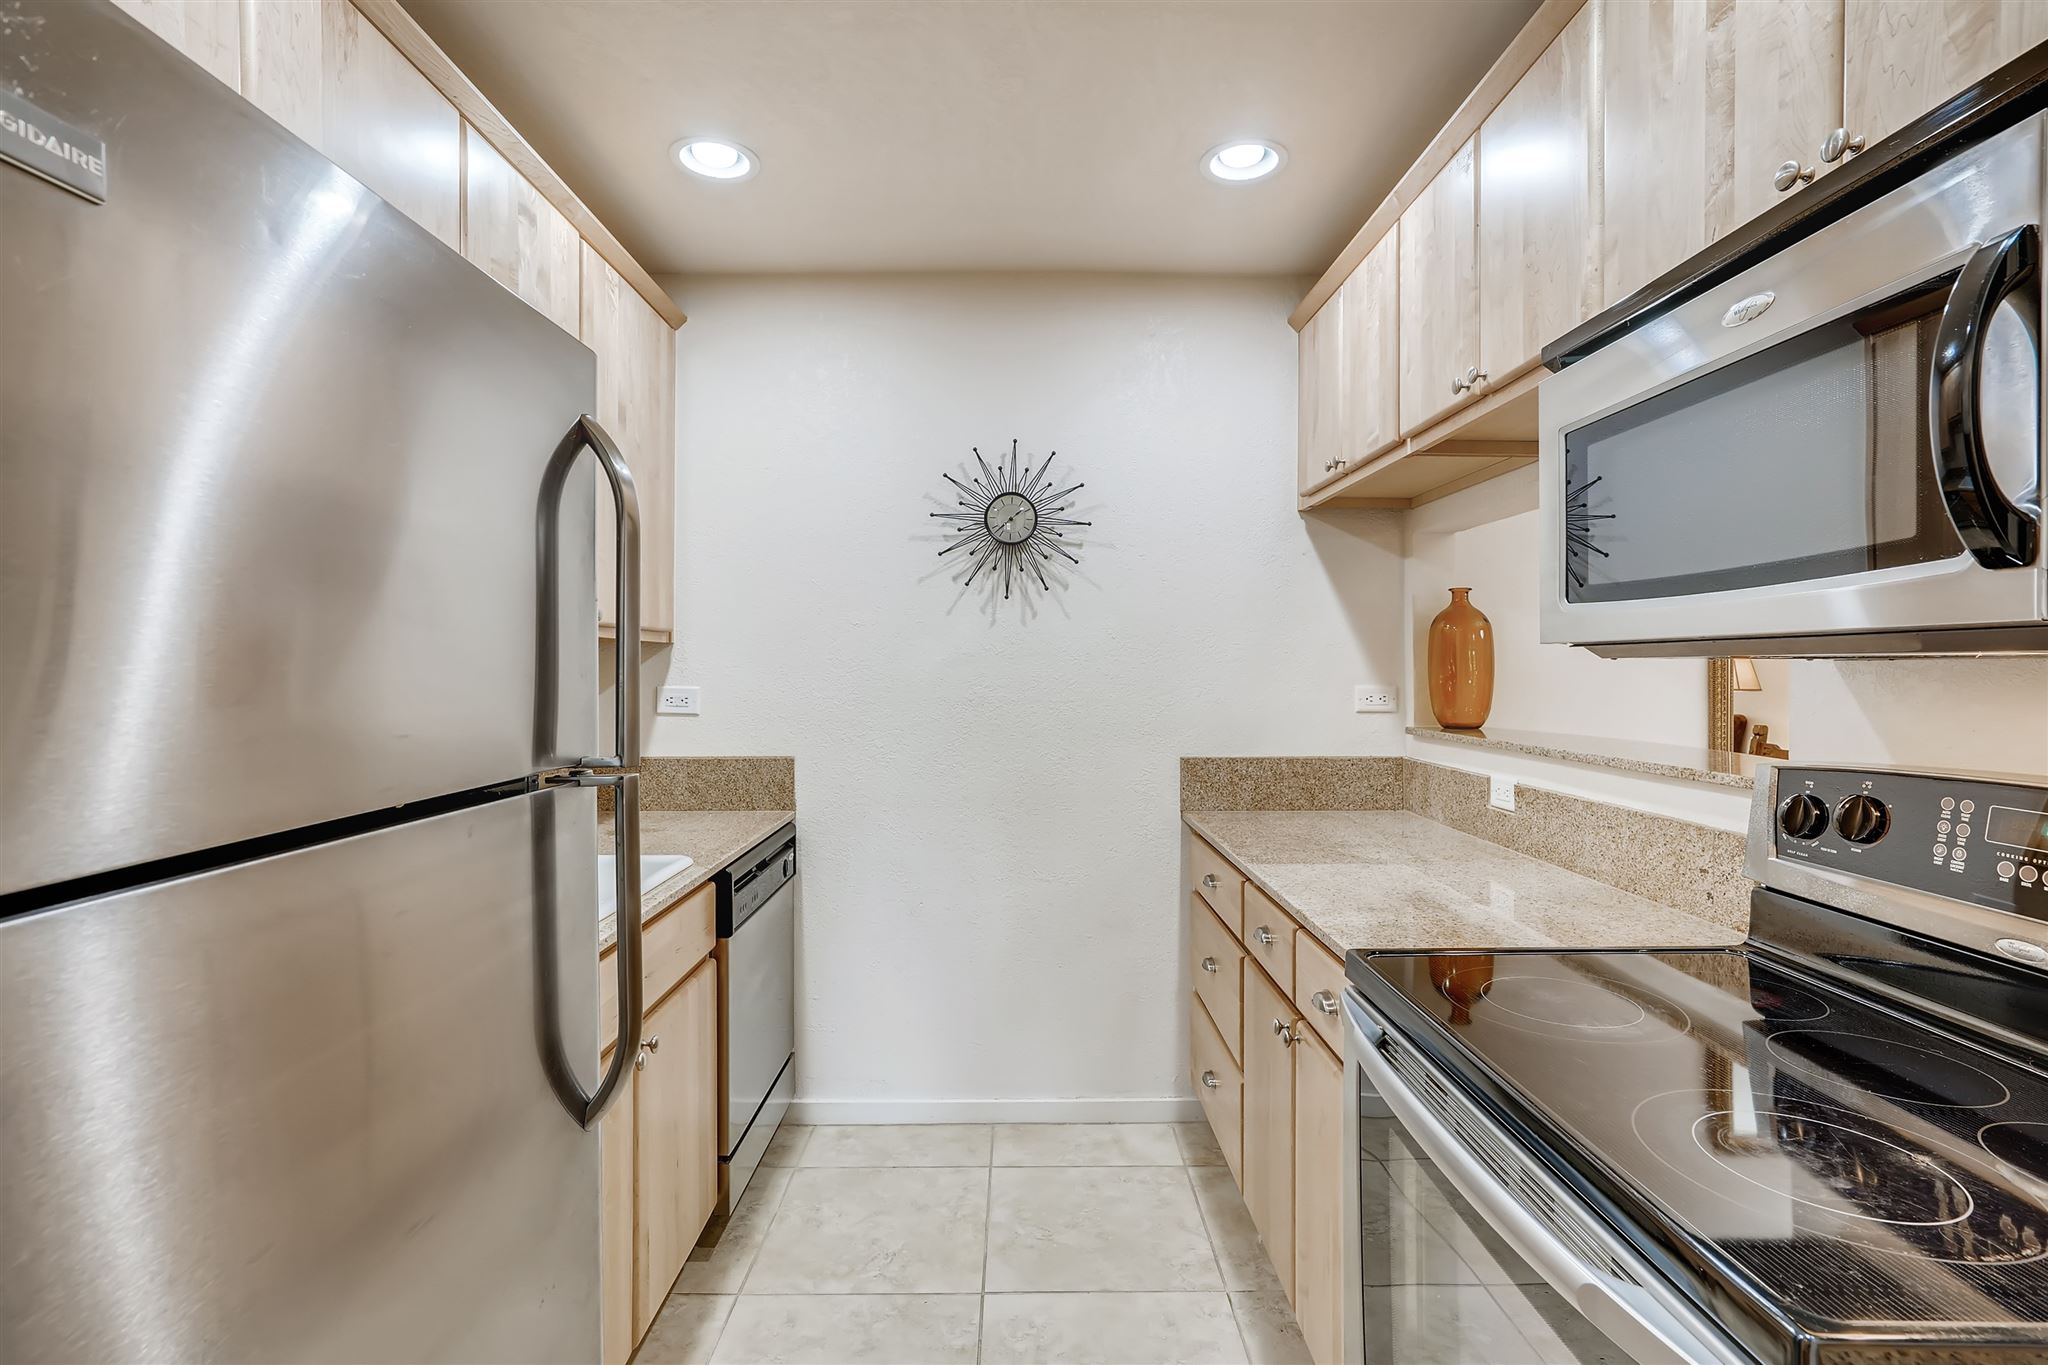 601 San Mateo Unit 145 Building 13, Santa Fe, New Mexico 87505, 1 Bedroom Bedrooms, ,1 BathroomBathrooms,Residential,For Sale,601 San Mateo Unit 145 Building 13,202101049